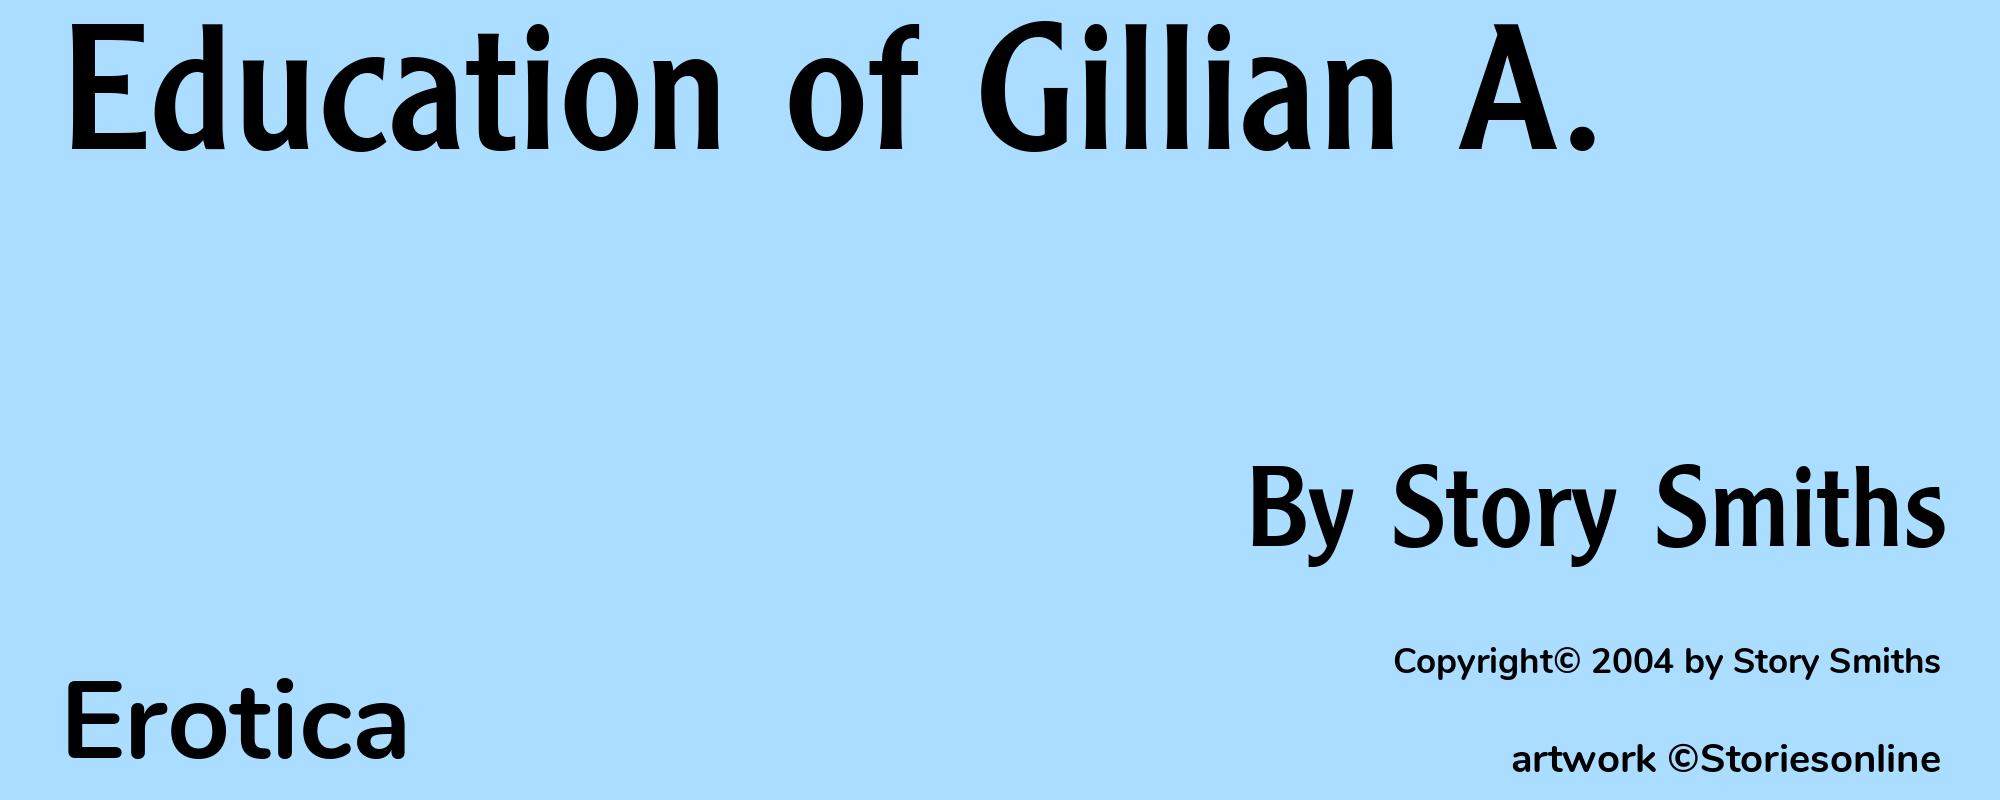 Education of Gillian A. - Cover